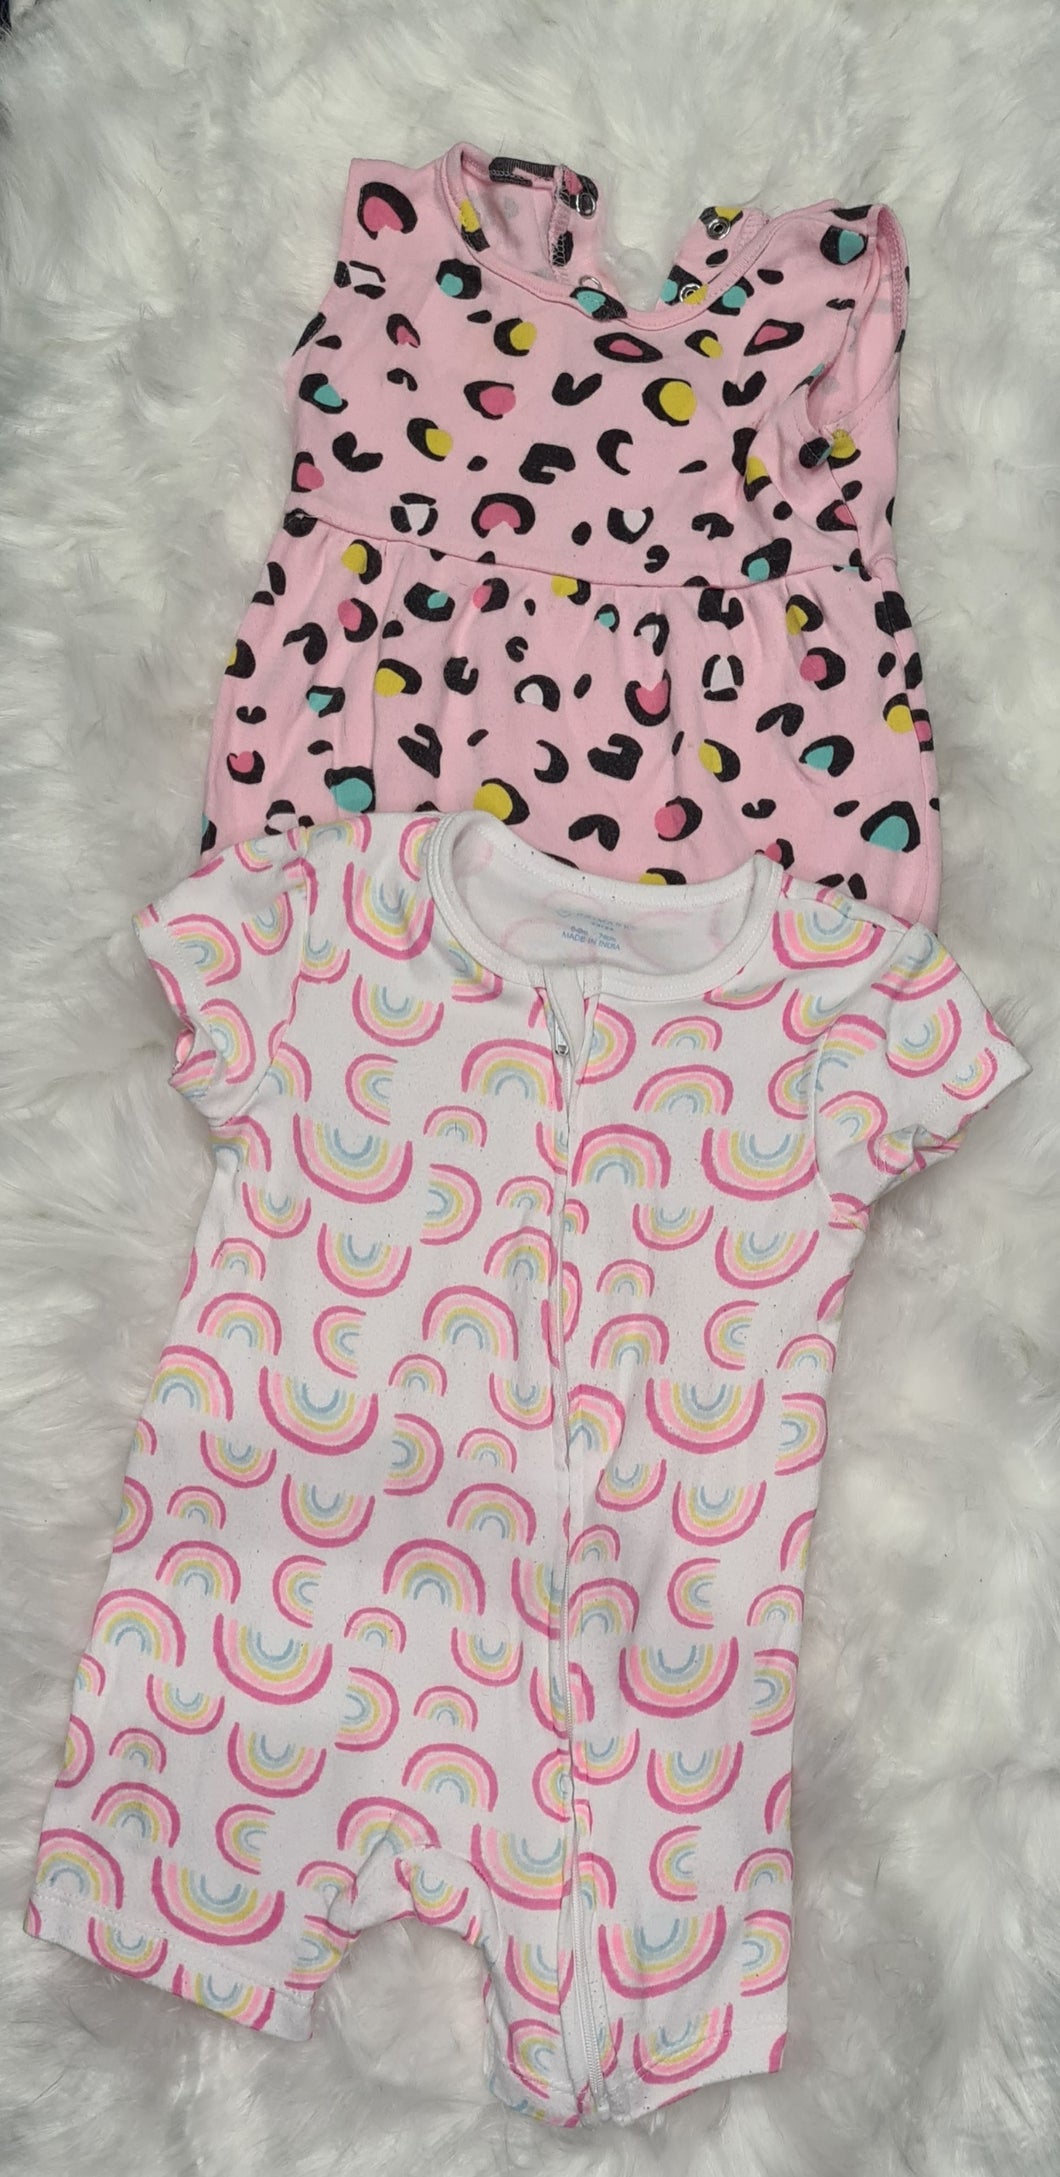 Girls 6-9 months - pack of 2 rompers